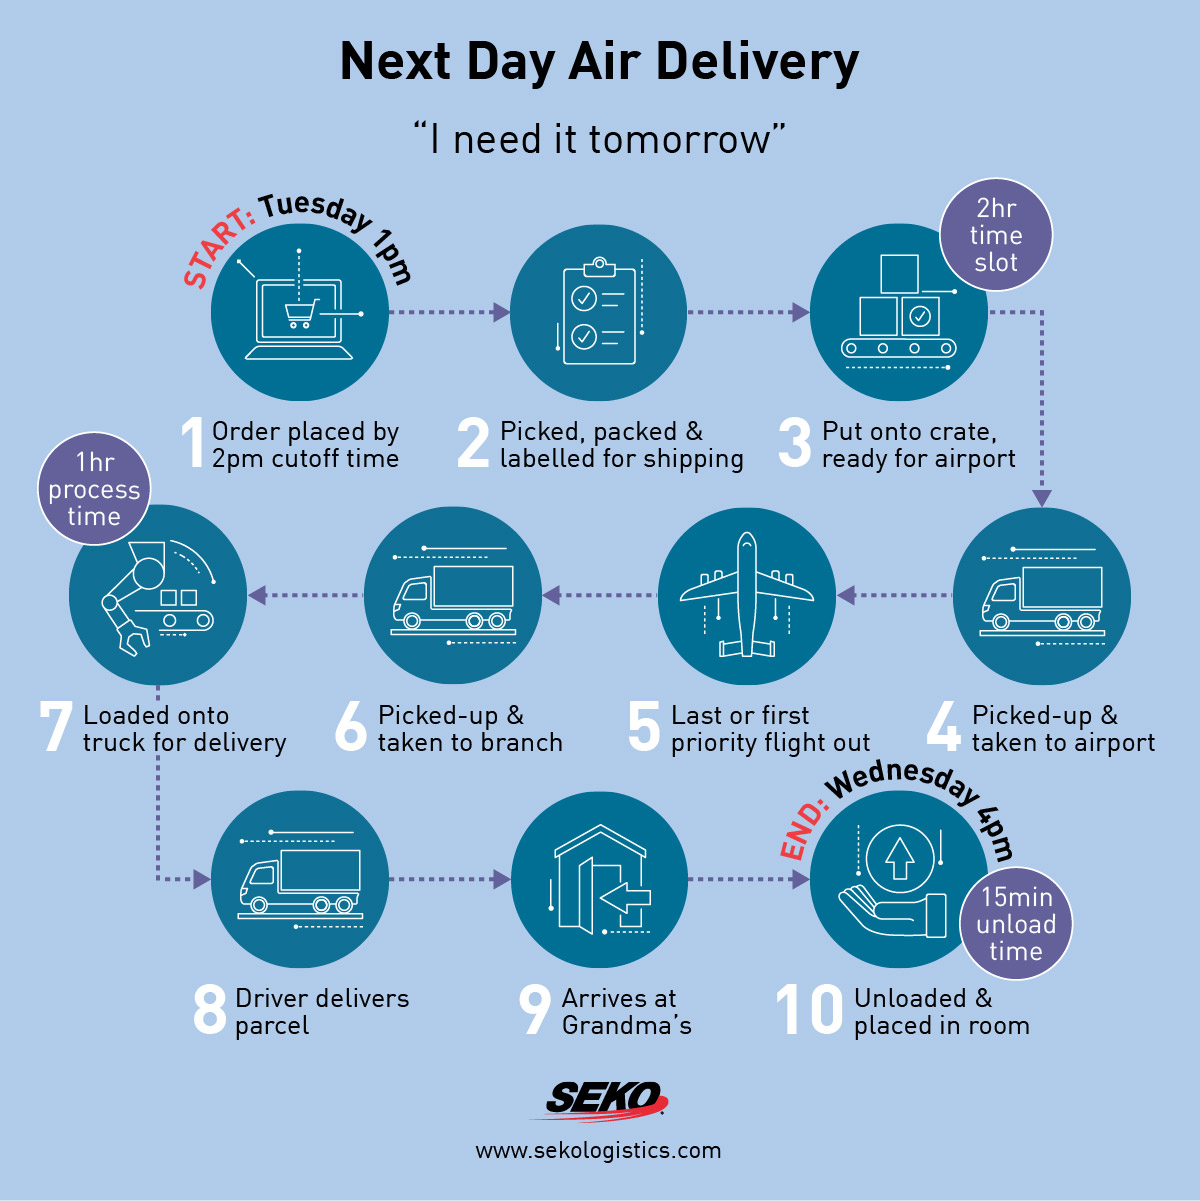 Next day air delivery